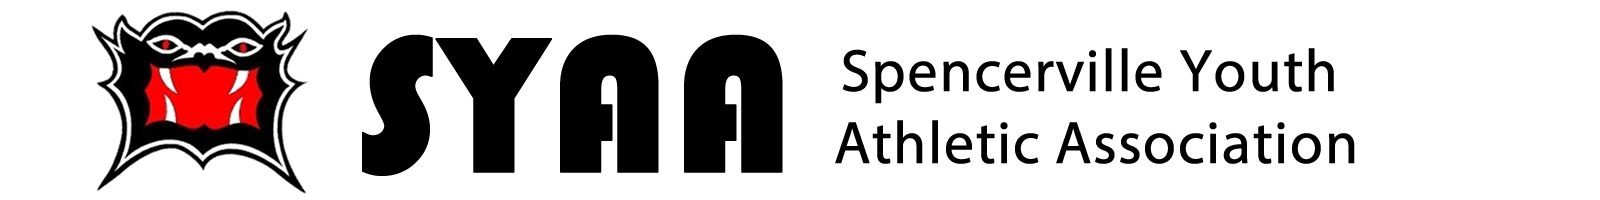 SYAA – Spencerville Youth Athletic Association – Your Source for Spencerville Youth Sports, Spencerville Youth Soccer, Spencerville Youth Baseball, Spencerville Youth Basketball, Spencerville Youth Volleyball, Spencerville Midget Football, Spencerville Youth Softball